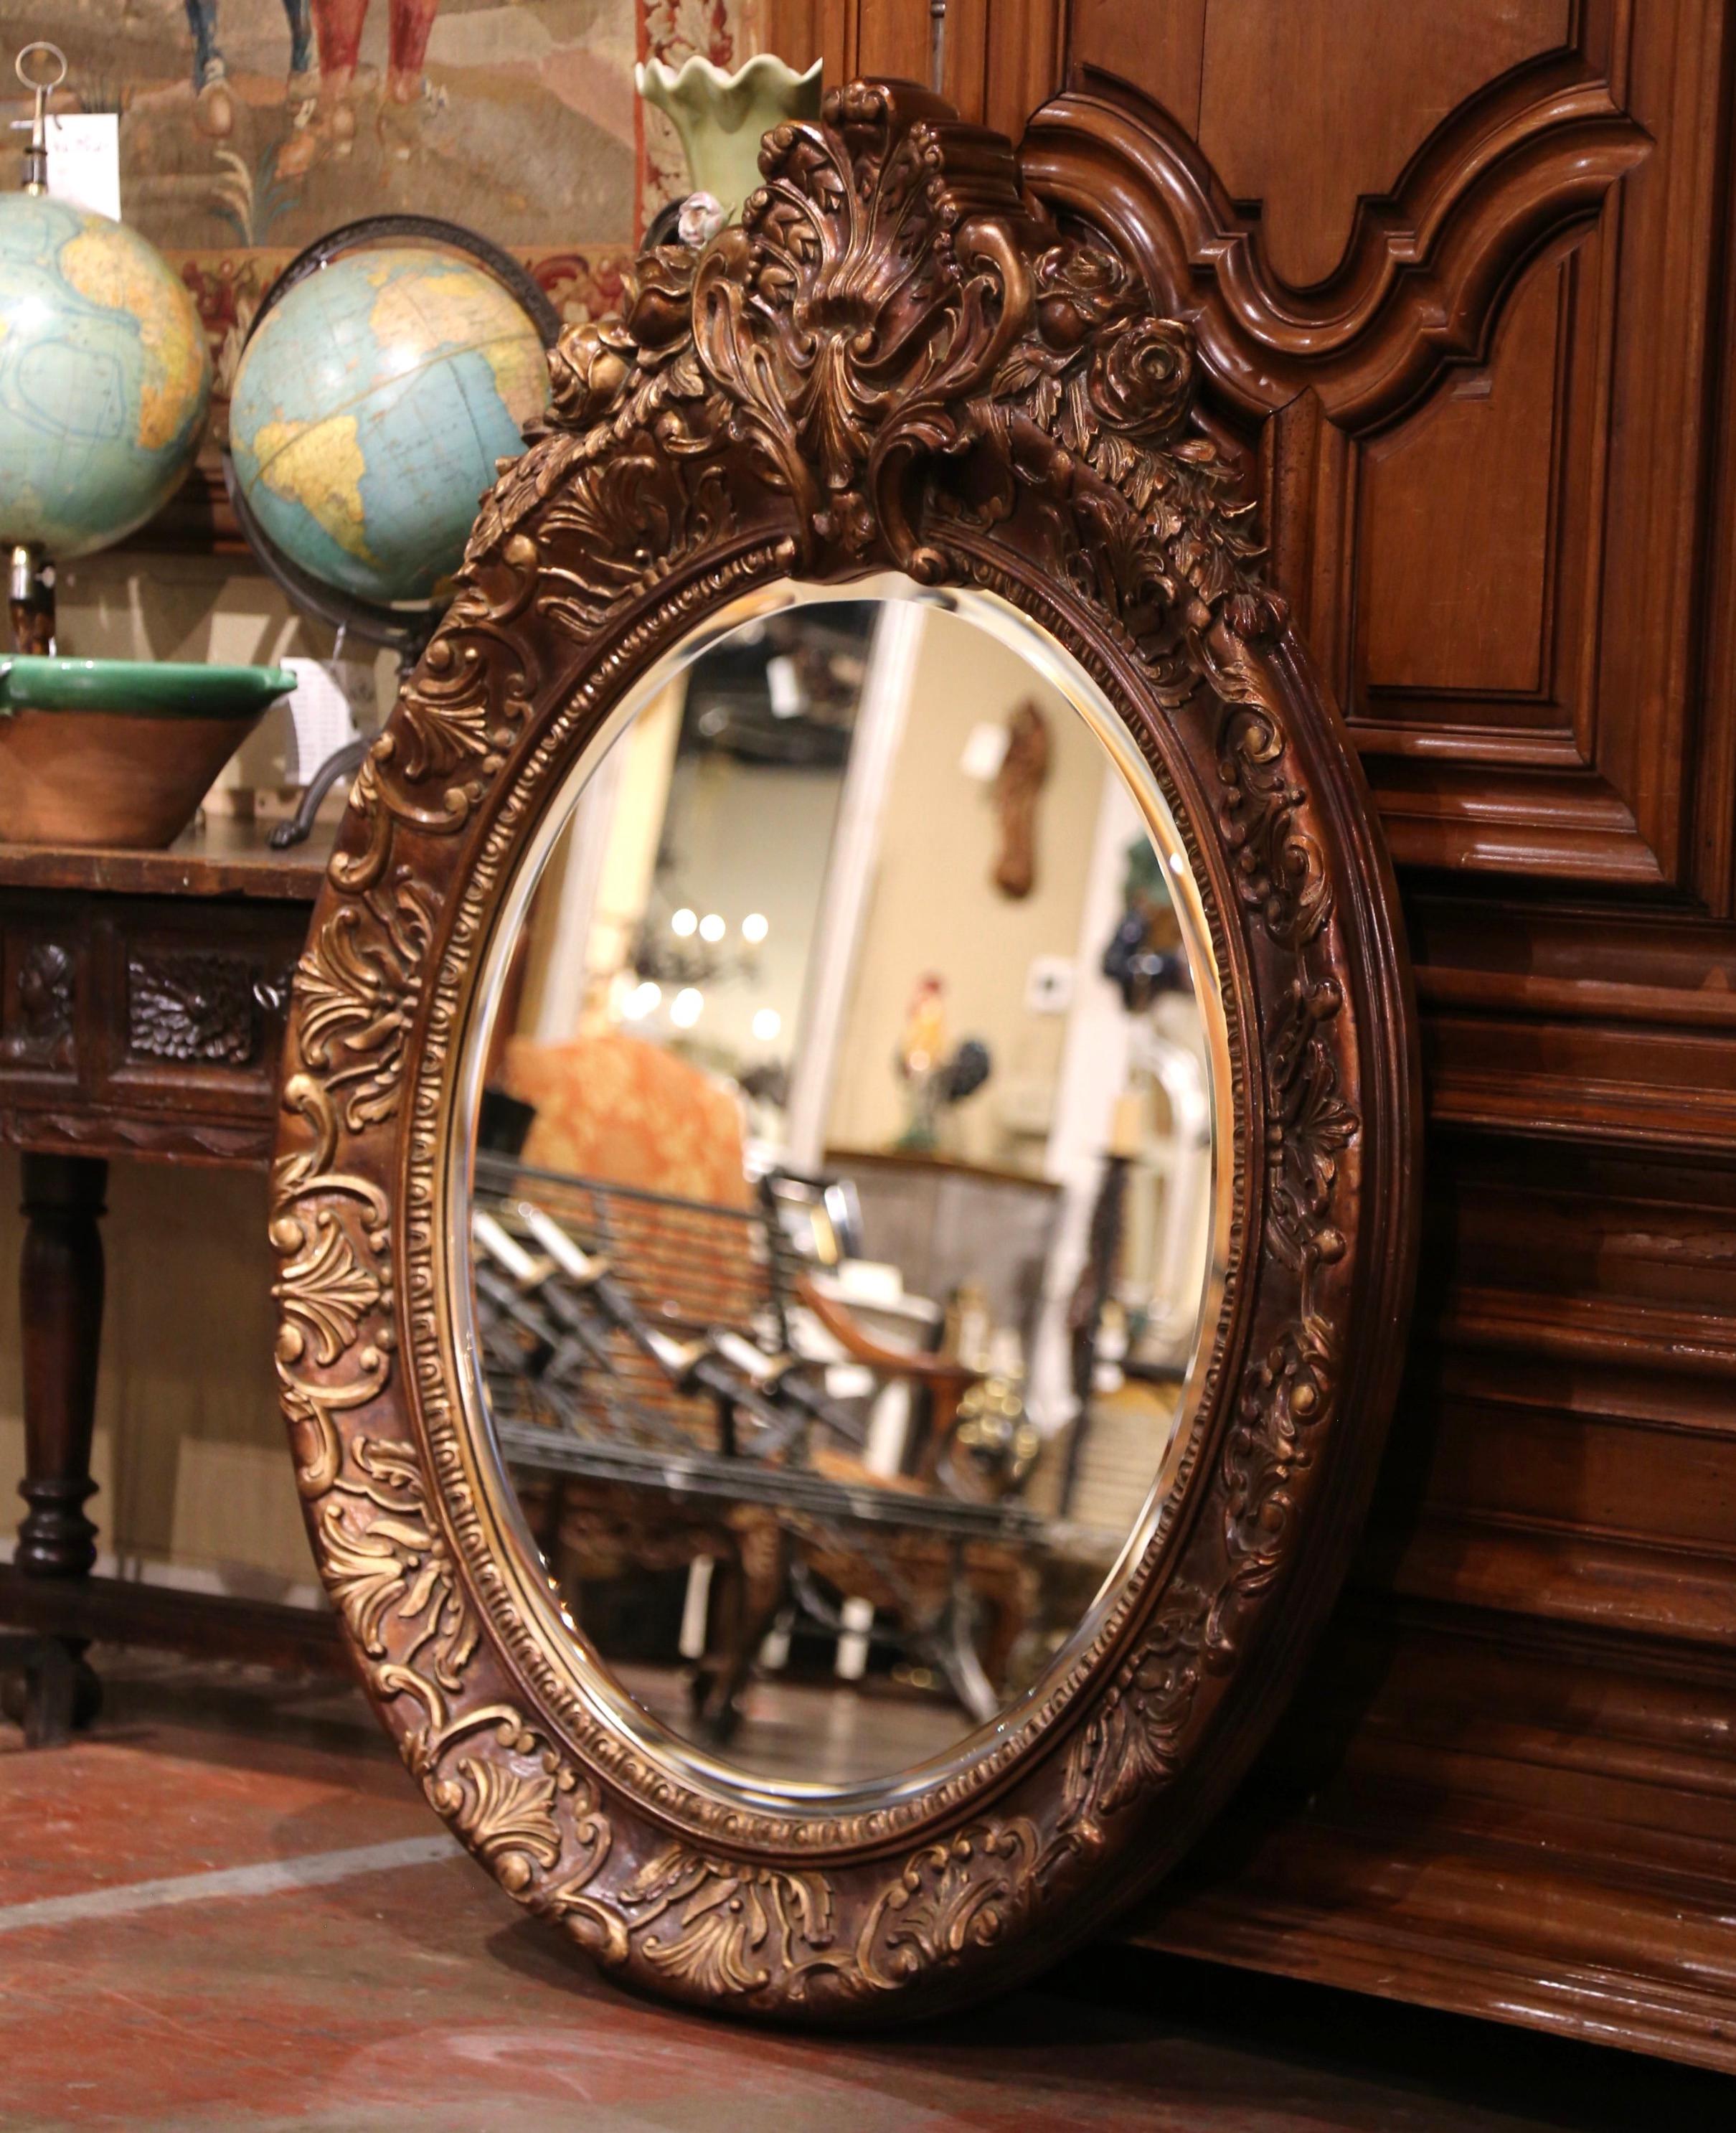 Oval in shape, the mirror features a decorative shell cartouche flanked with foliage decor, discrete engraved floral and rose motifs around the frame and another intricate shell motif in high relief at the bottom; the frame is further embellished